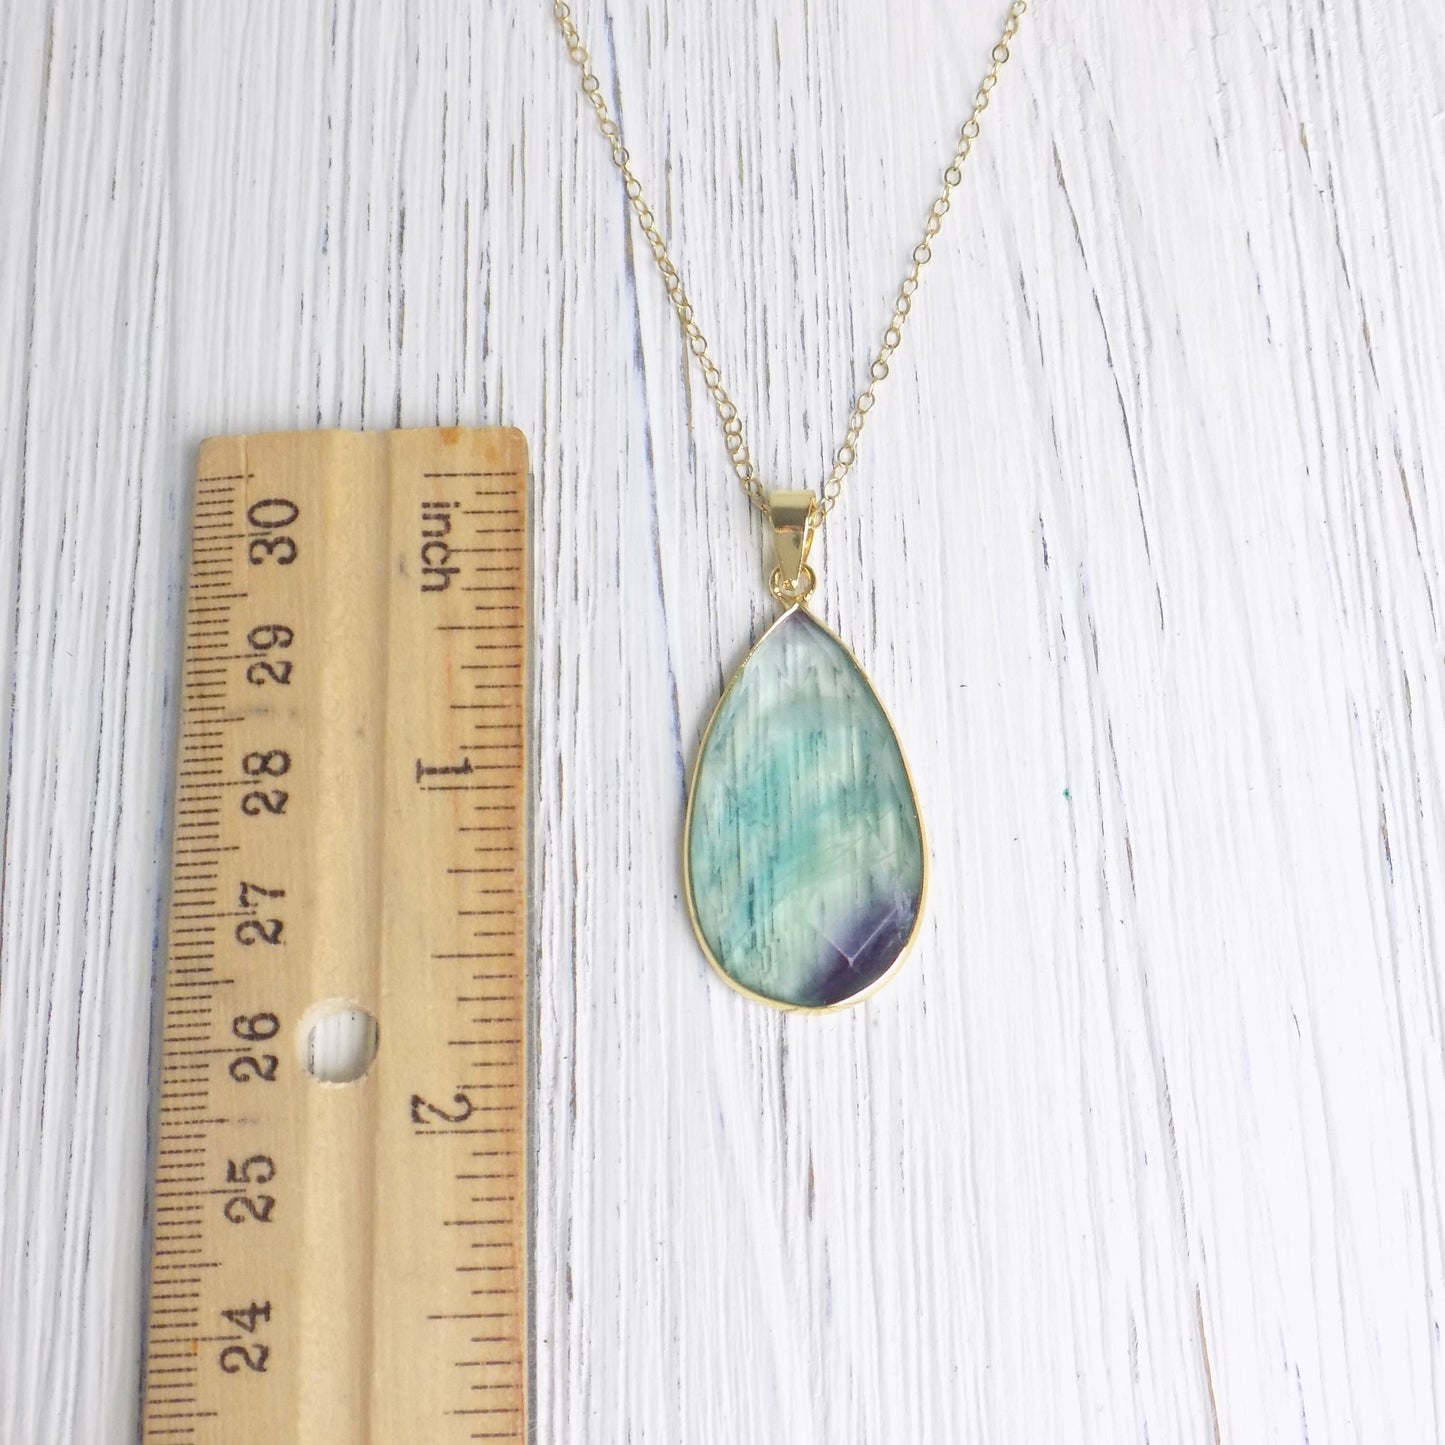 Fluorite Necklace, Boho Purple Green Crystal Necklace, Chunky Gemstone Necklace, Gold Layering Necklace, Mom Gift, M6-718